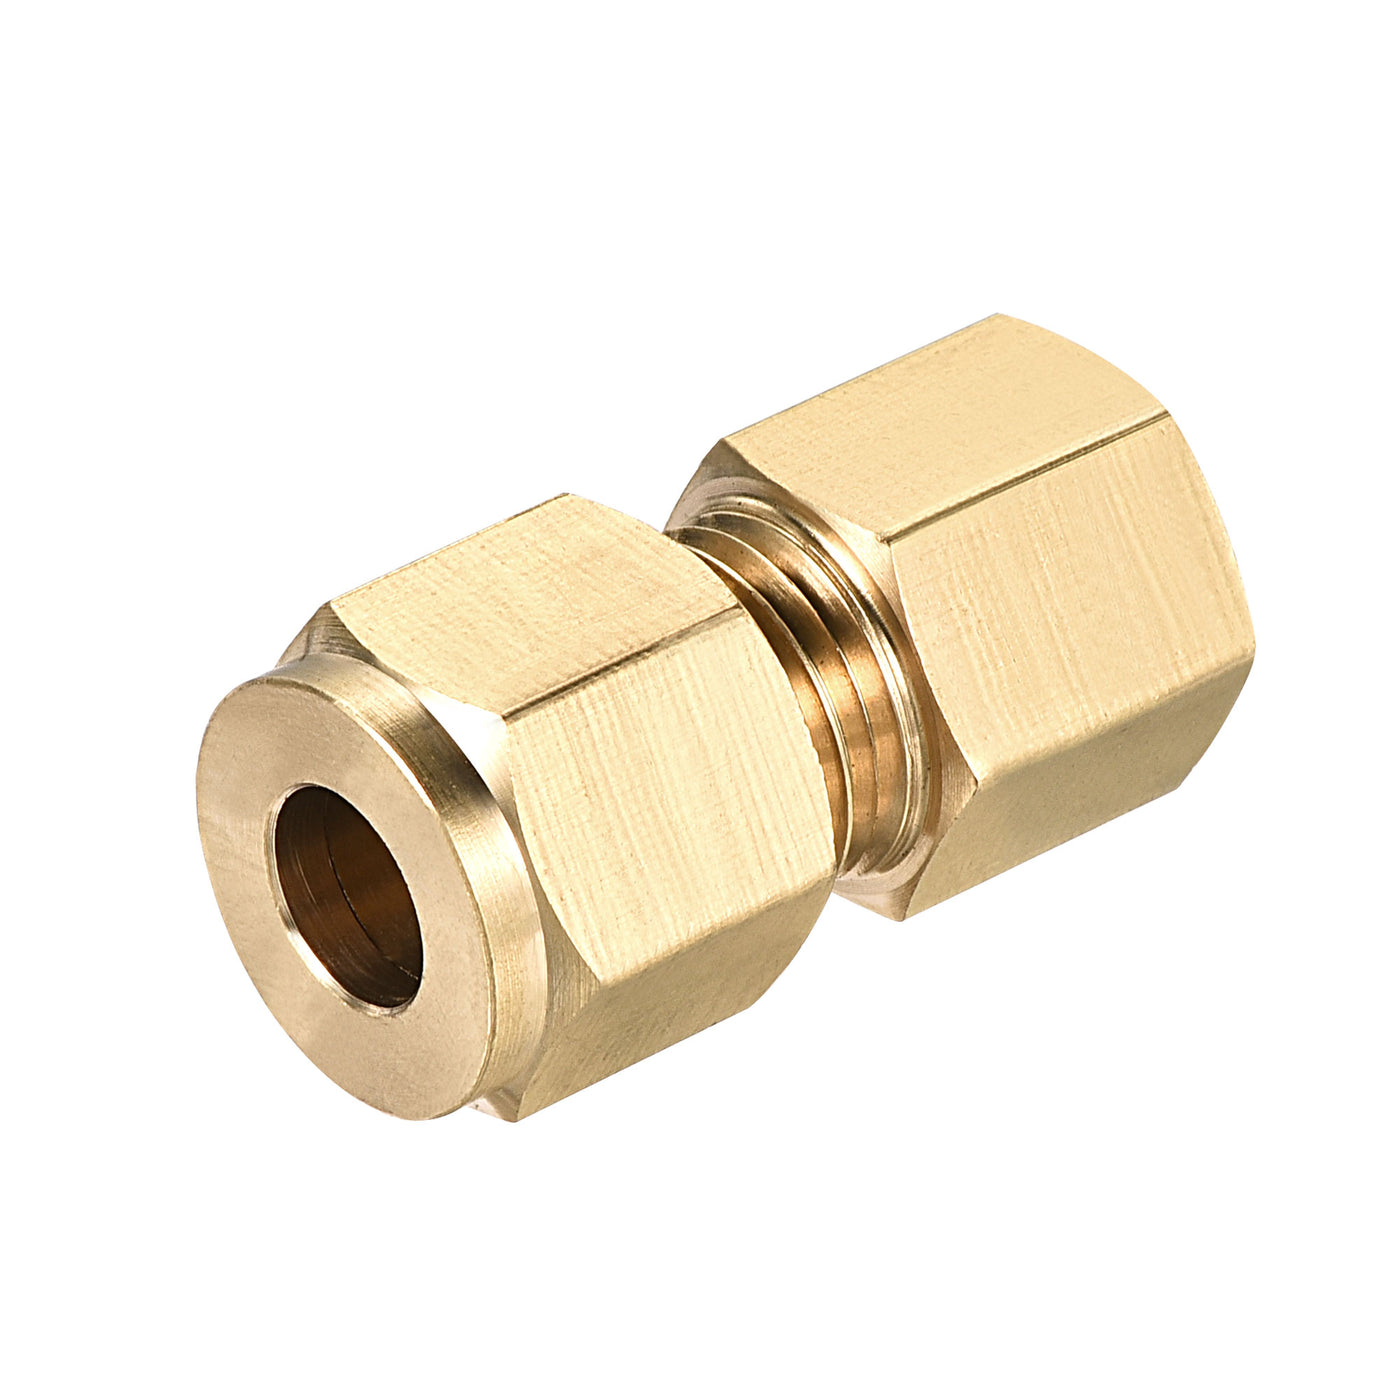 uxcell Uxcell Compression Tube Fitting M12x1mm Female Thread x 8mm Tube OD Straight Coupling Adapter Brass